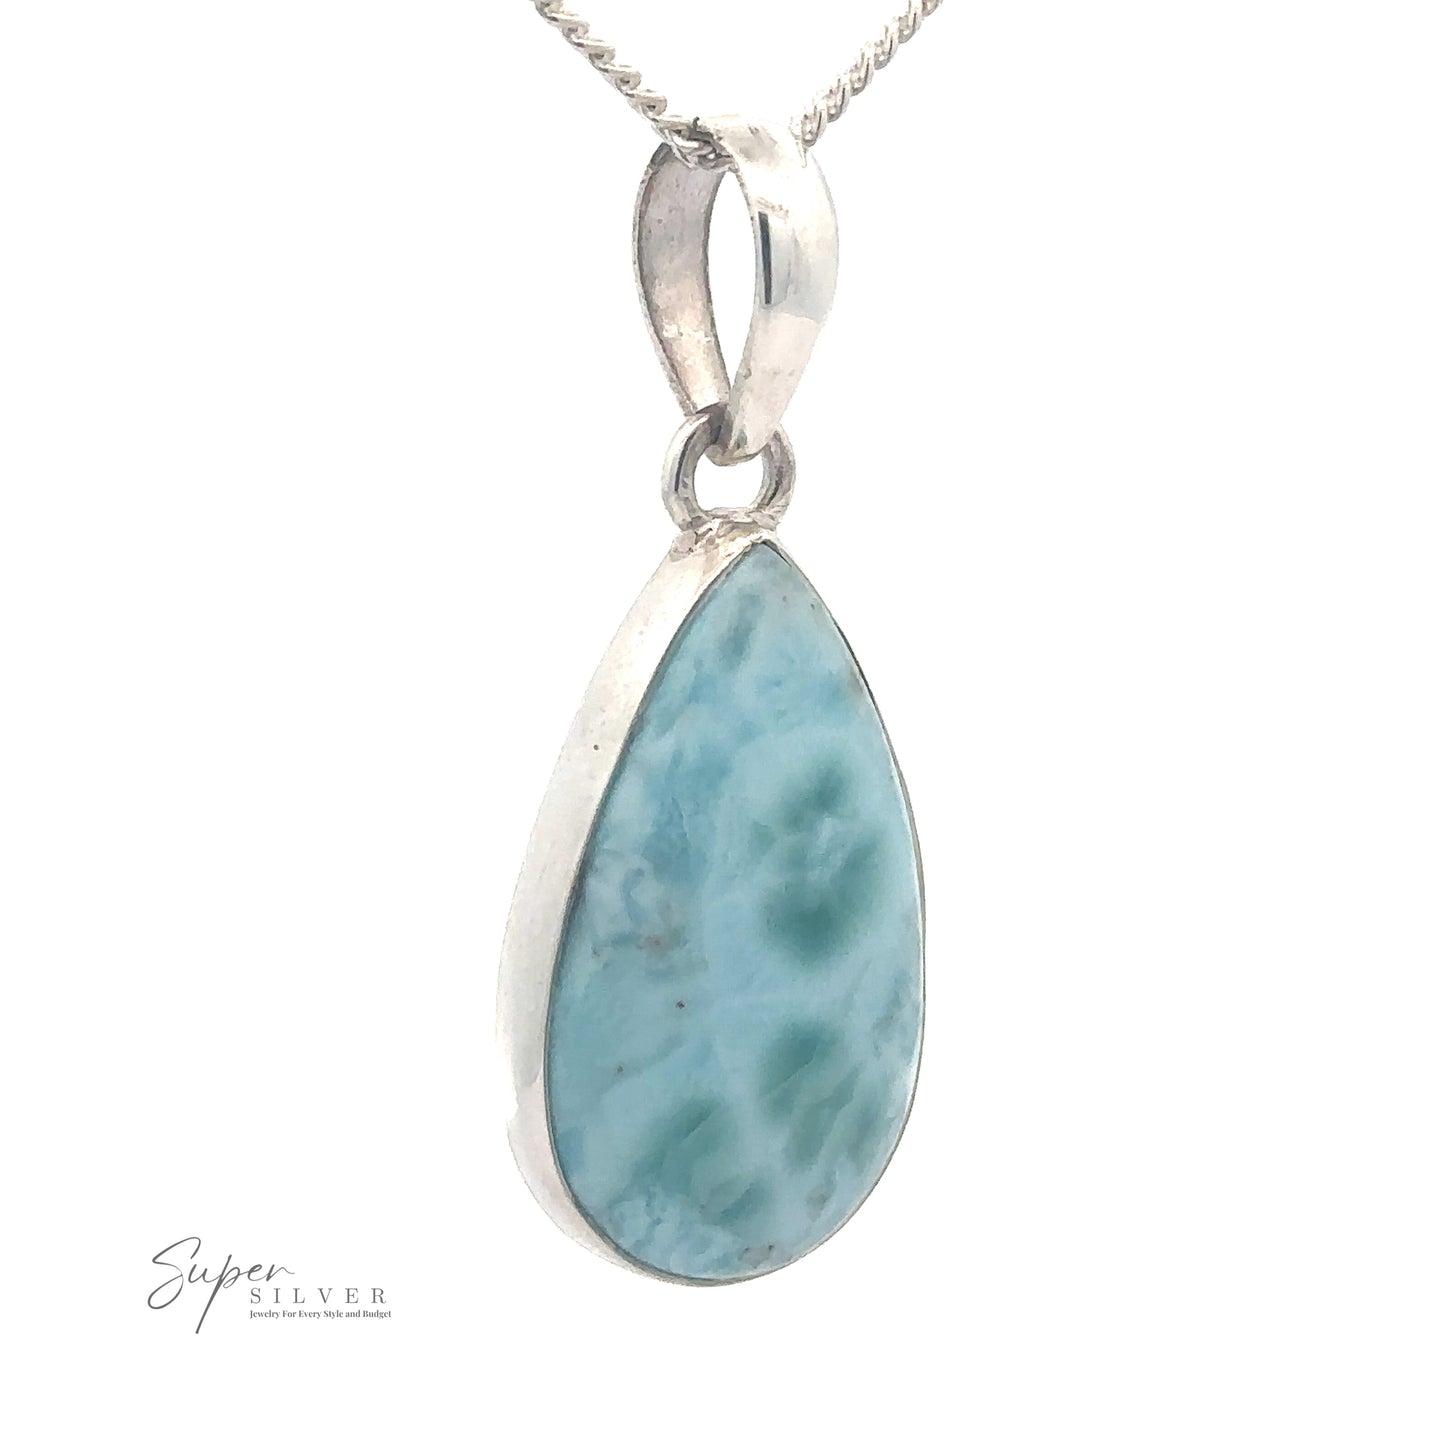 
                  
                    A silver necklace with a teardrop-shaped Simple Larimar Teardrop Pendant against a white background. The .925 Sterling Silver setting beautifully complements the subtle marbling patterns of the blue gemstone.
                  
                